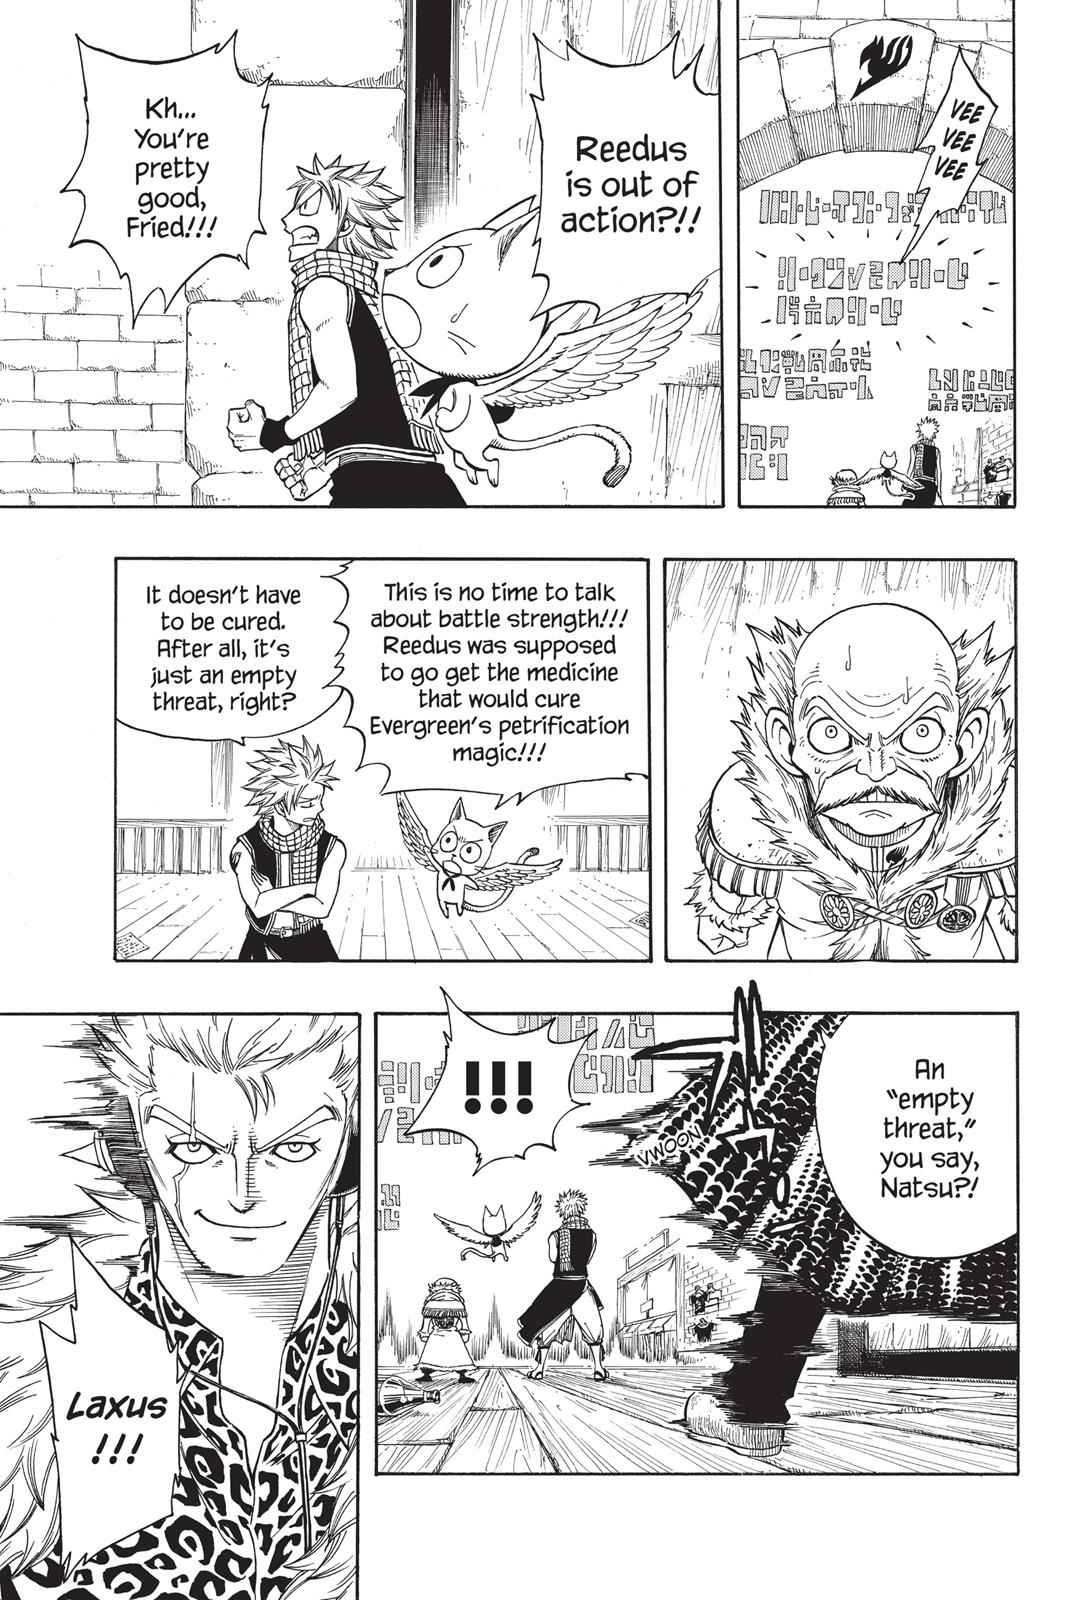  Chapter 110 image 007